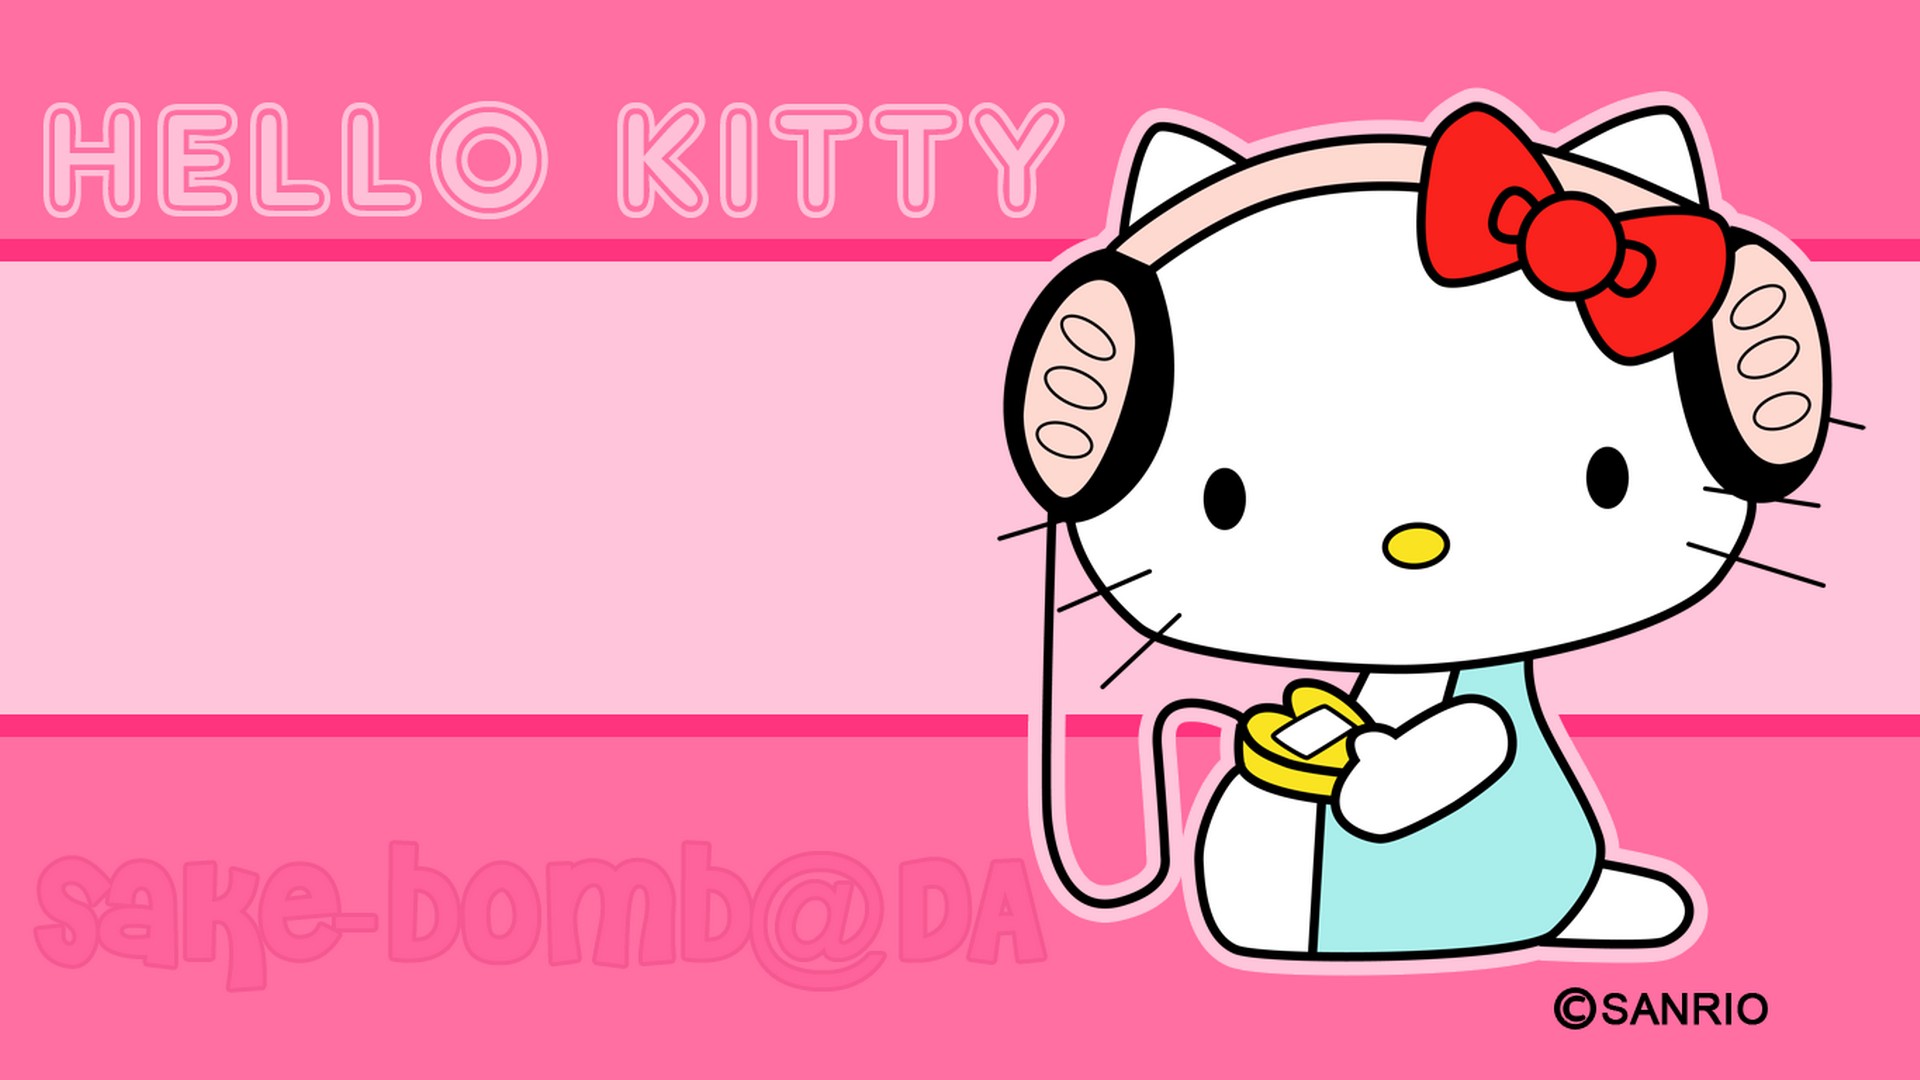 Hello Kitty Images Desktop Wallpaper with resolution 1920X1080 pixel. You can use this wallpaper as background for your desktop Computer Screensavers, Android or iPhone smartphones